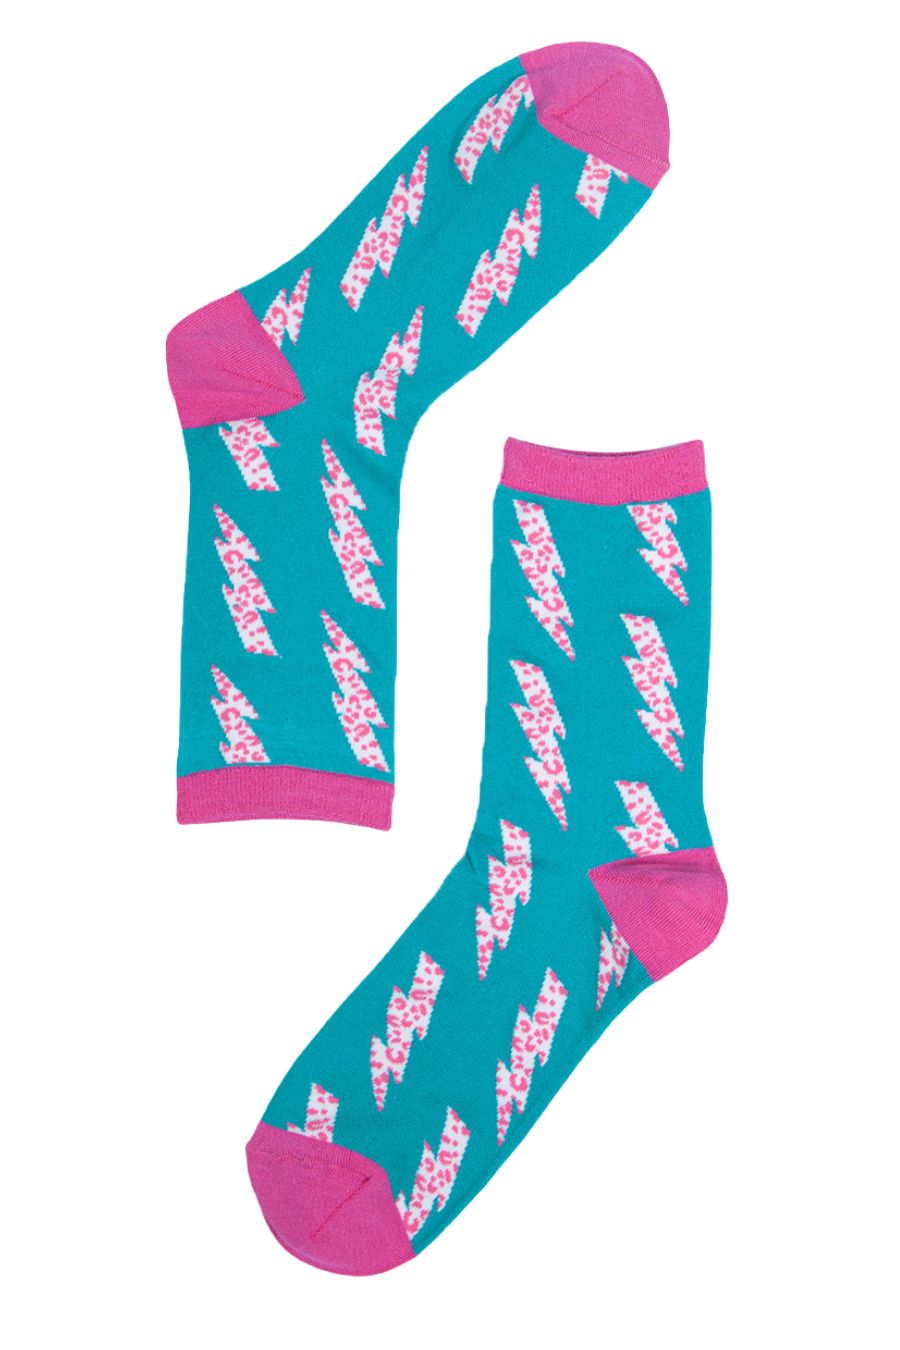 blue ankle socks with a pink leopard print thunder bolt pattern